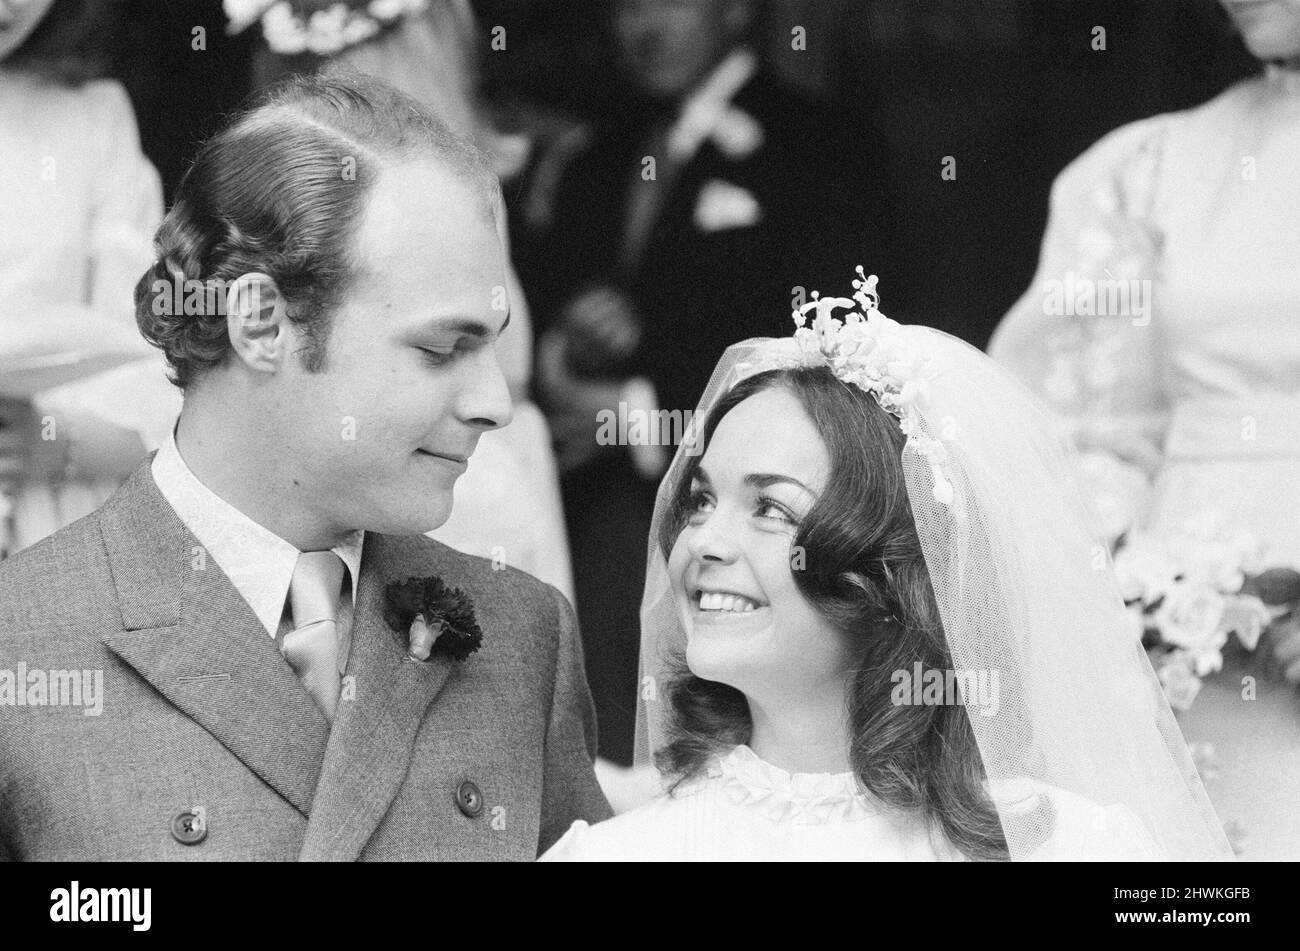 Wedding of Julie Parker and Timothy Buxton, at the Church of the Immaculate Conception, Farm Street, London, 14th June 1972. Our Picture Shows ... bride and groom. Julie Parker 22 is the daughter of Commander Michael Parker, a friend and former Private Secretary to Prince Philip, The Duke of Edinburgh, who is the god father of Julie Parker.   Timothy Buxton is the son of naturalist and television executive Aubrey Buxton, Baron Buxton of Alsa, and an old friend of Prince Philip. Stock Photo